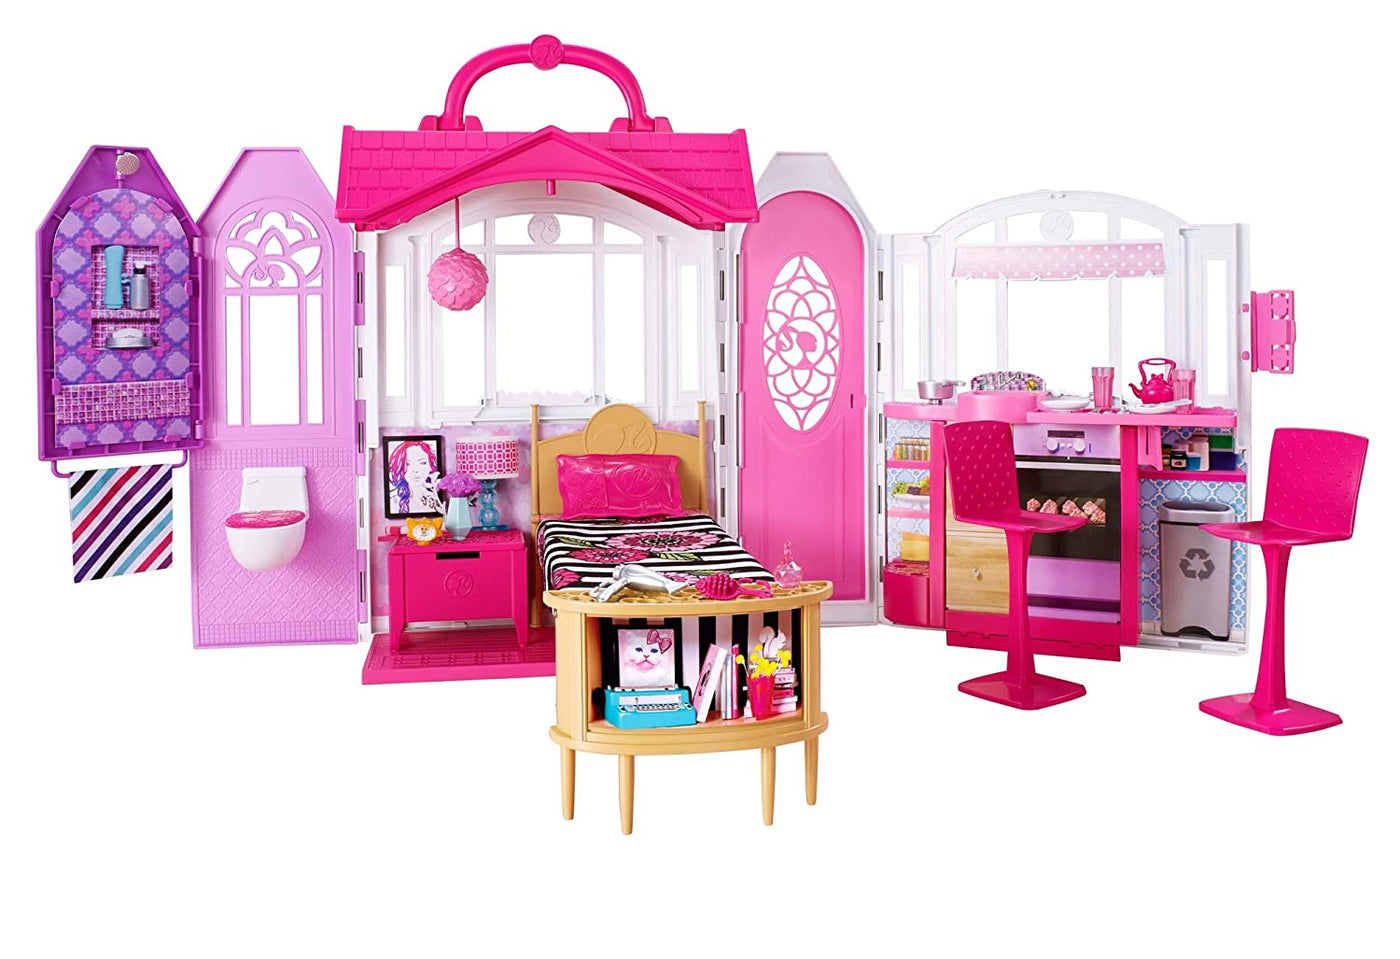 Glam Getaway House Bed and Bath Playset | Barbie